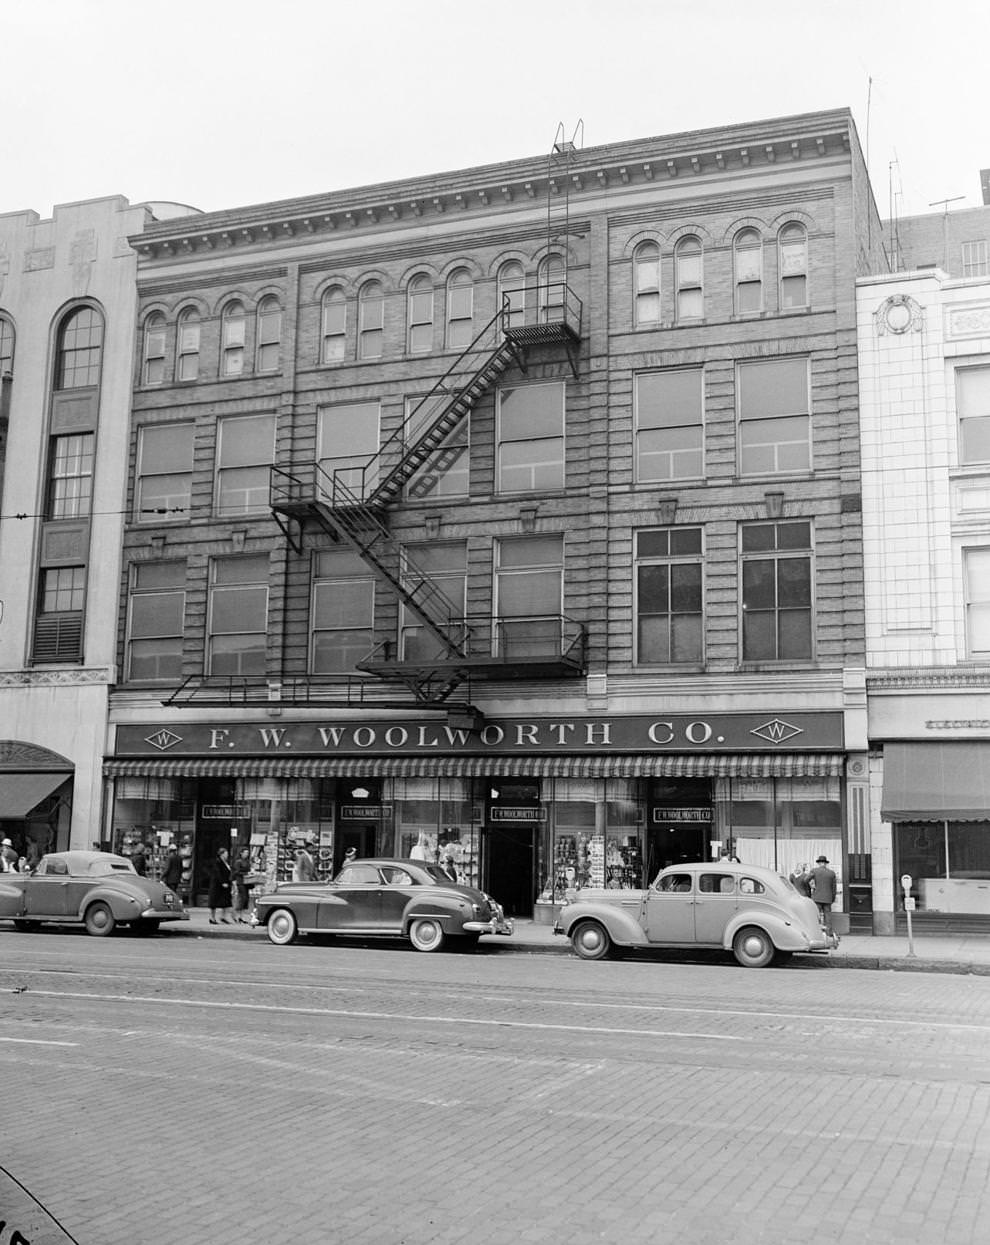 A view of the F.W. Woolworth Co. store at 509 E. Broad St. downtown in June 1950.